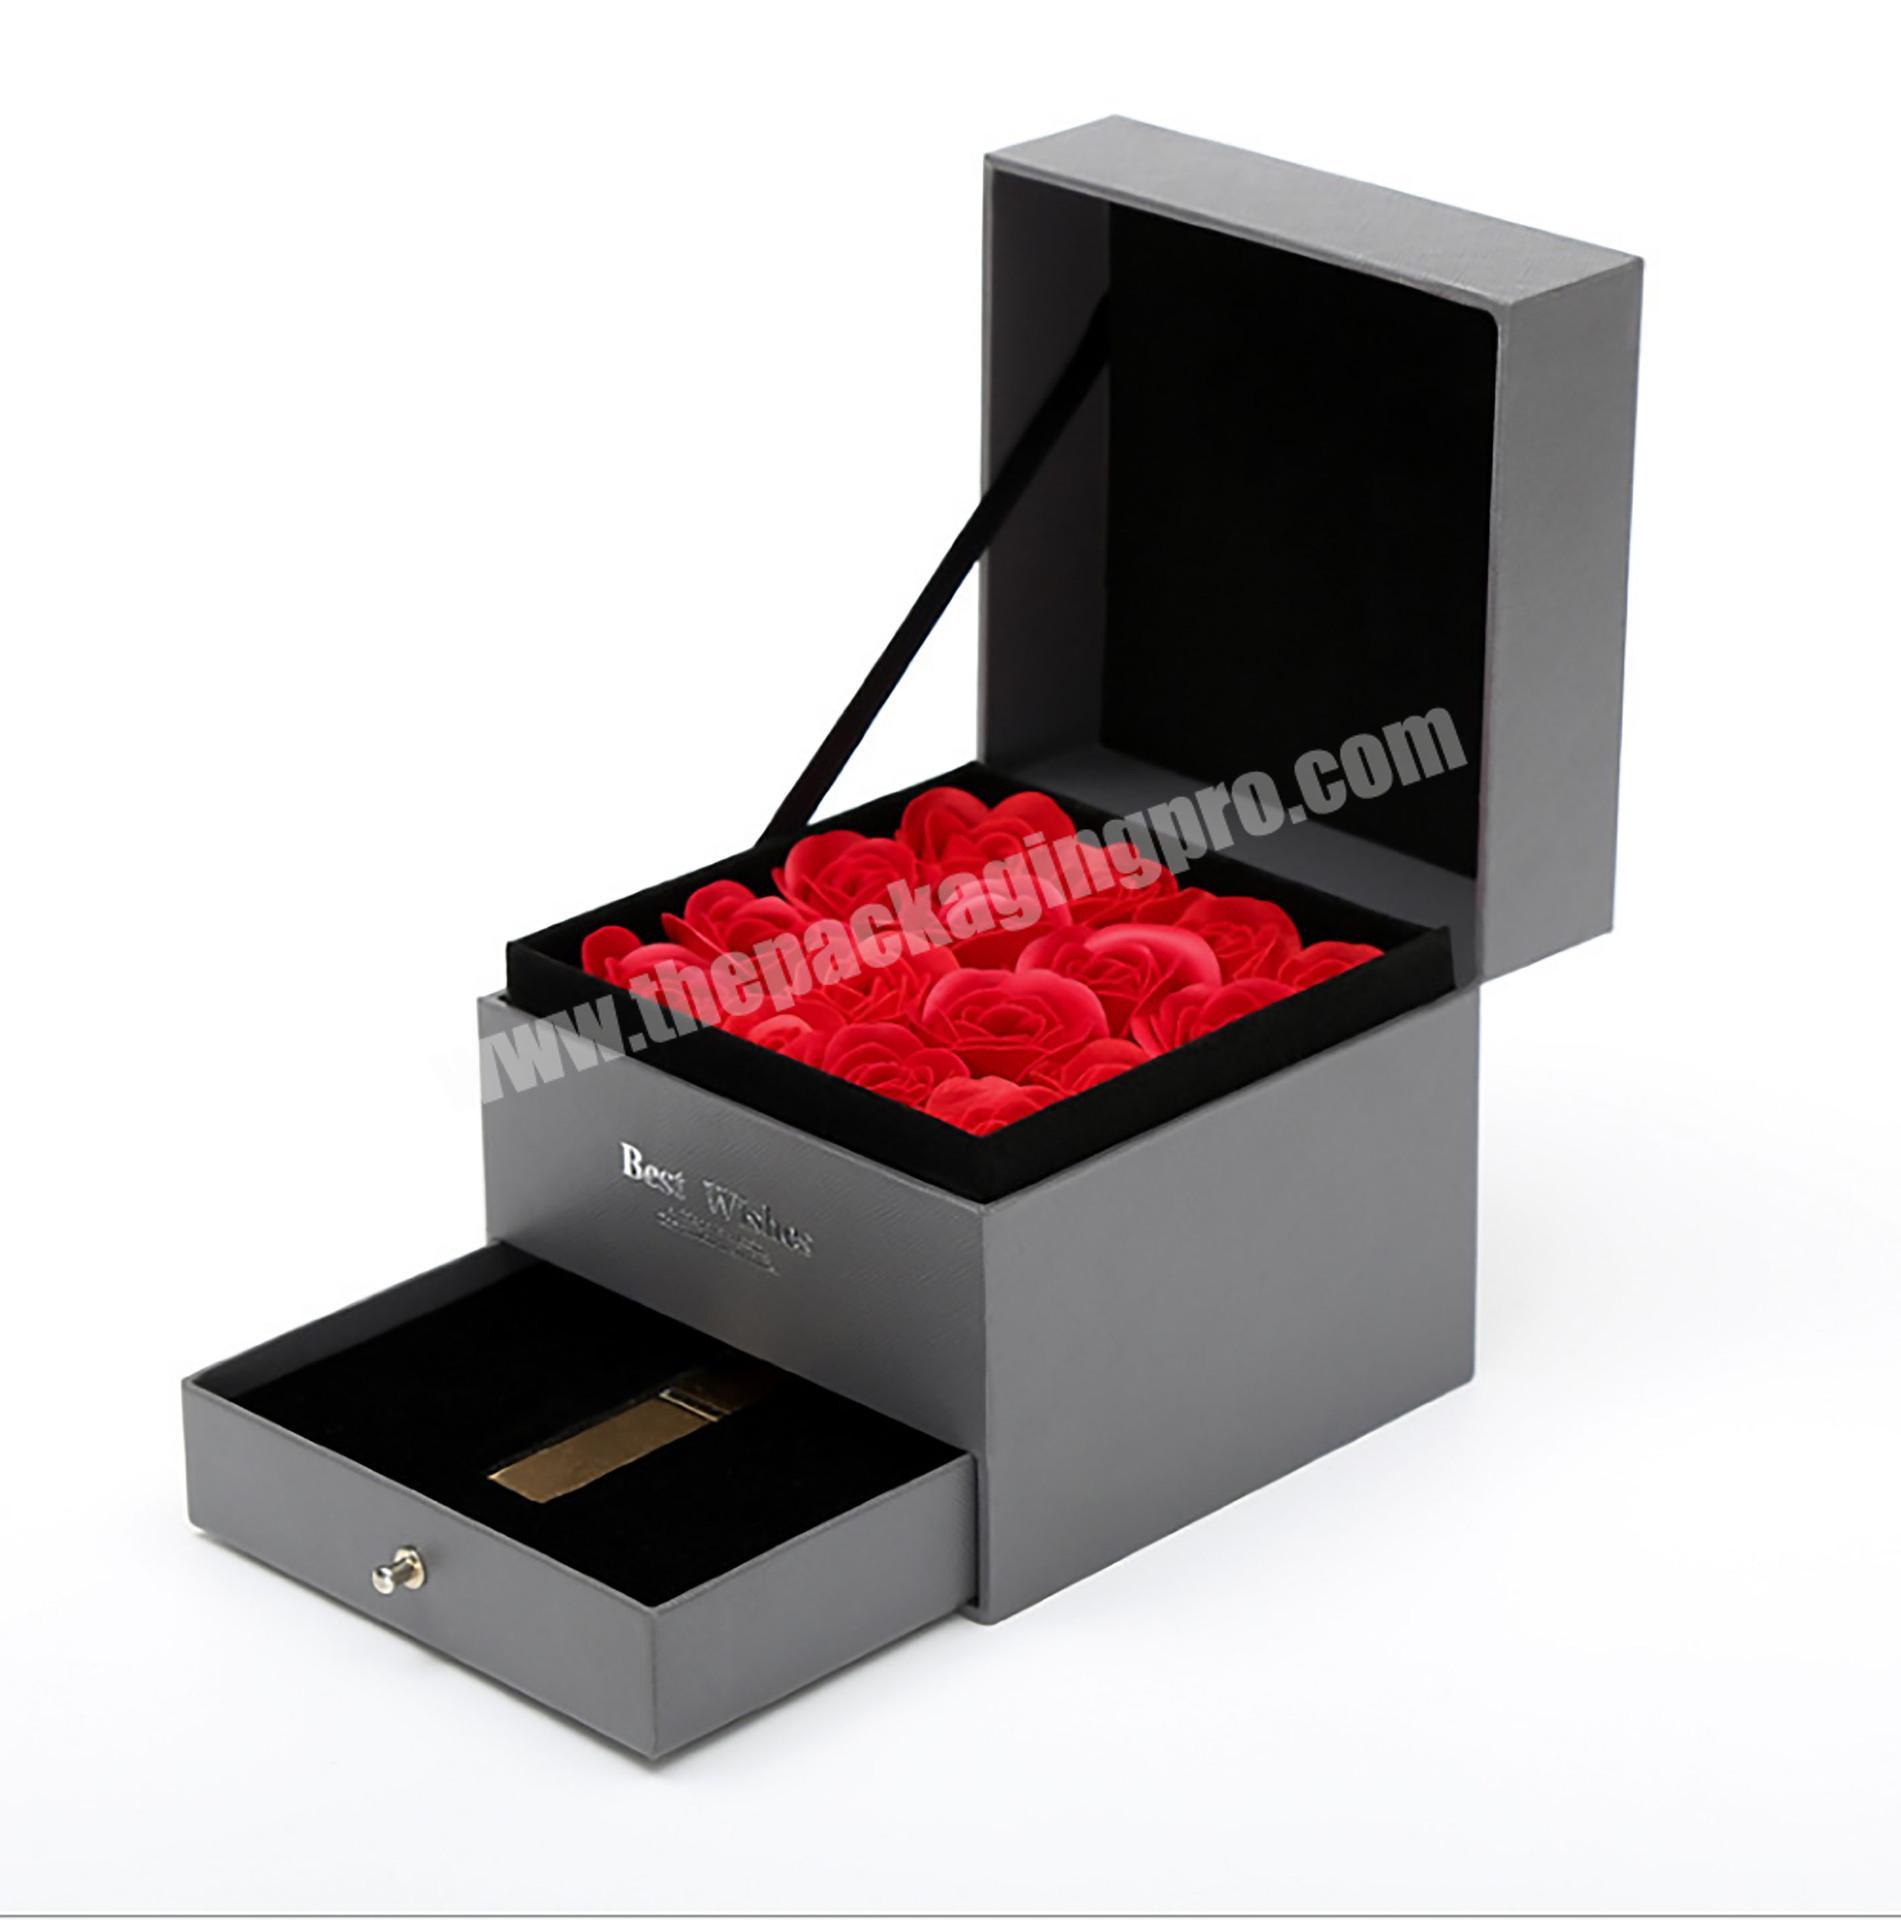 Factory-customized luxury gift box with drawers for gift packaging such as flowers